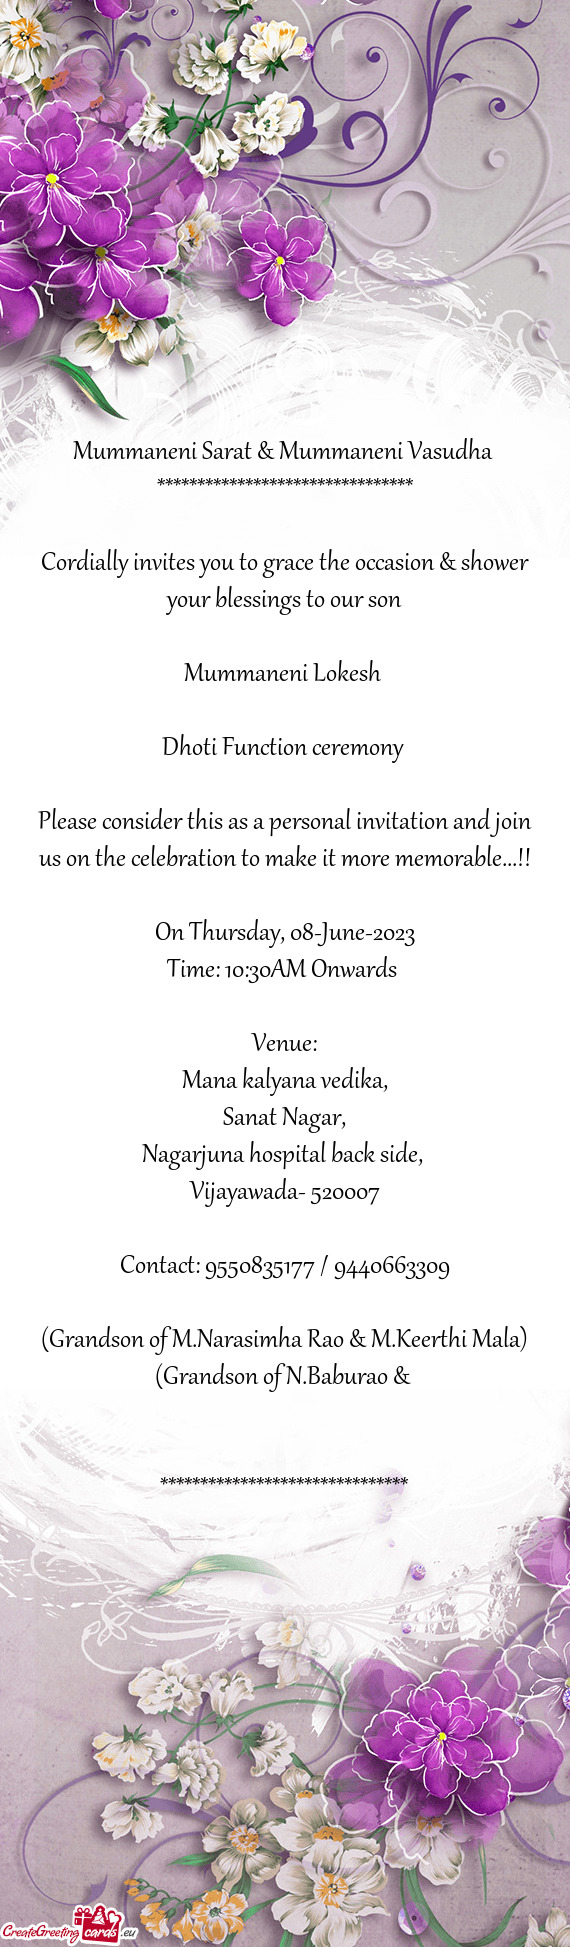 Cordially invites you to grace the occasion & shower your blessings to our son